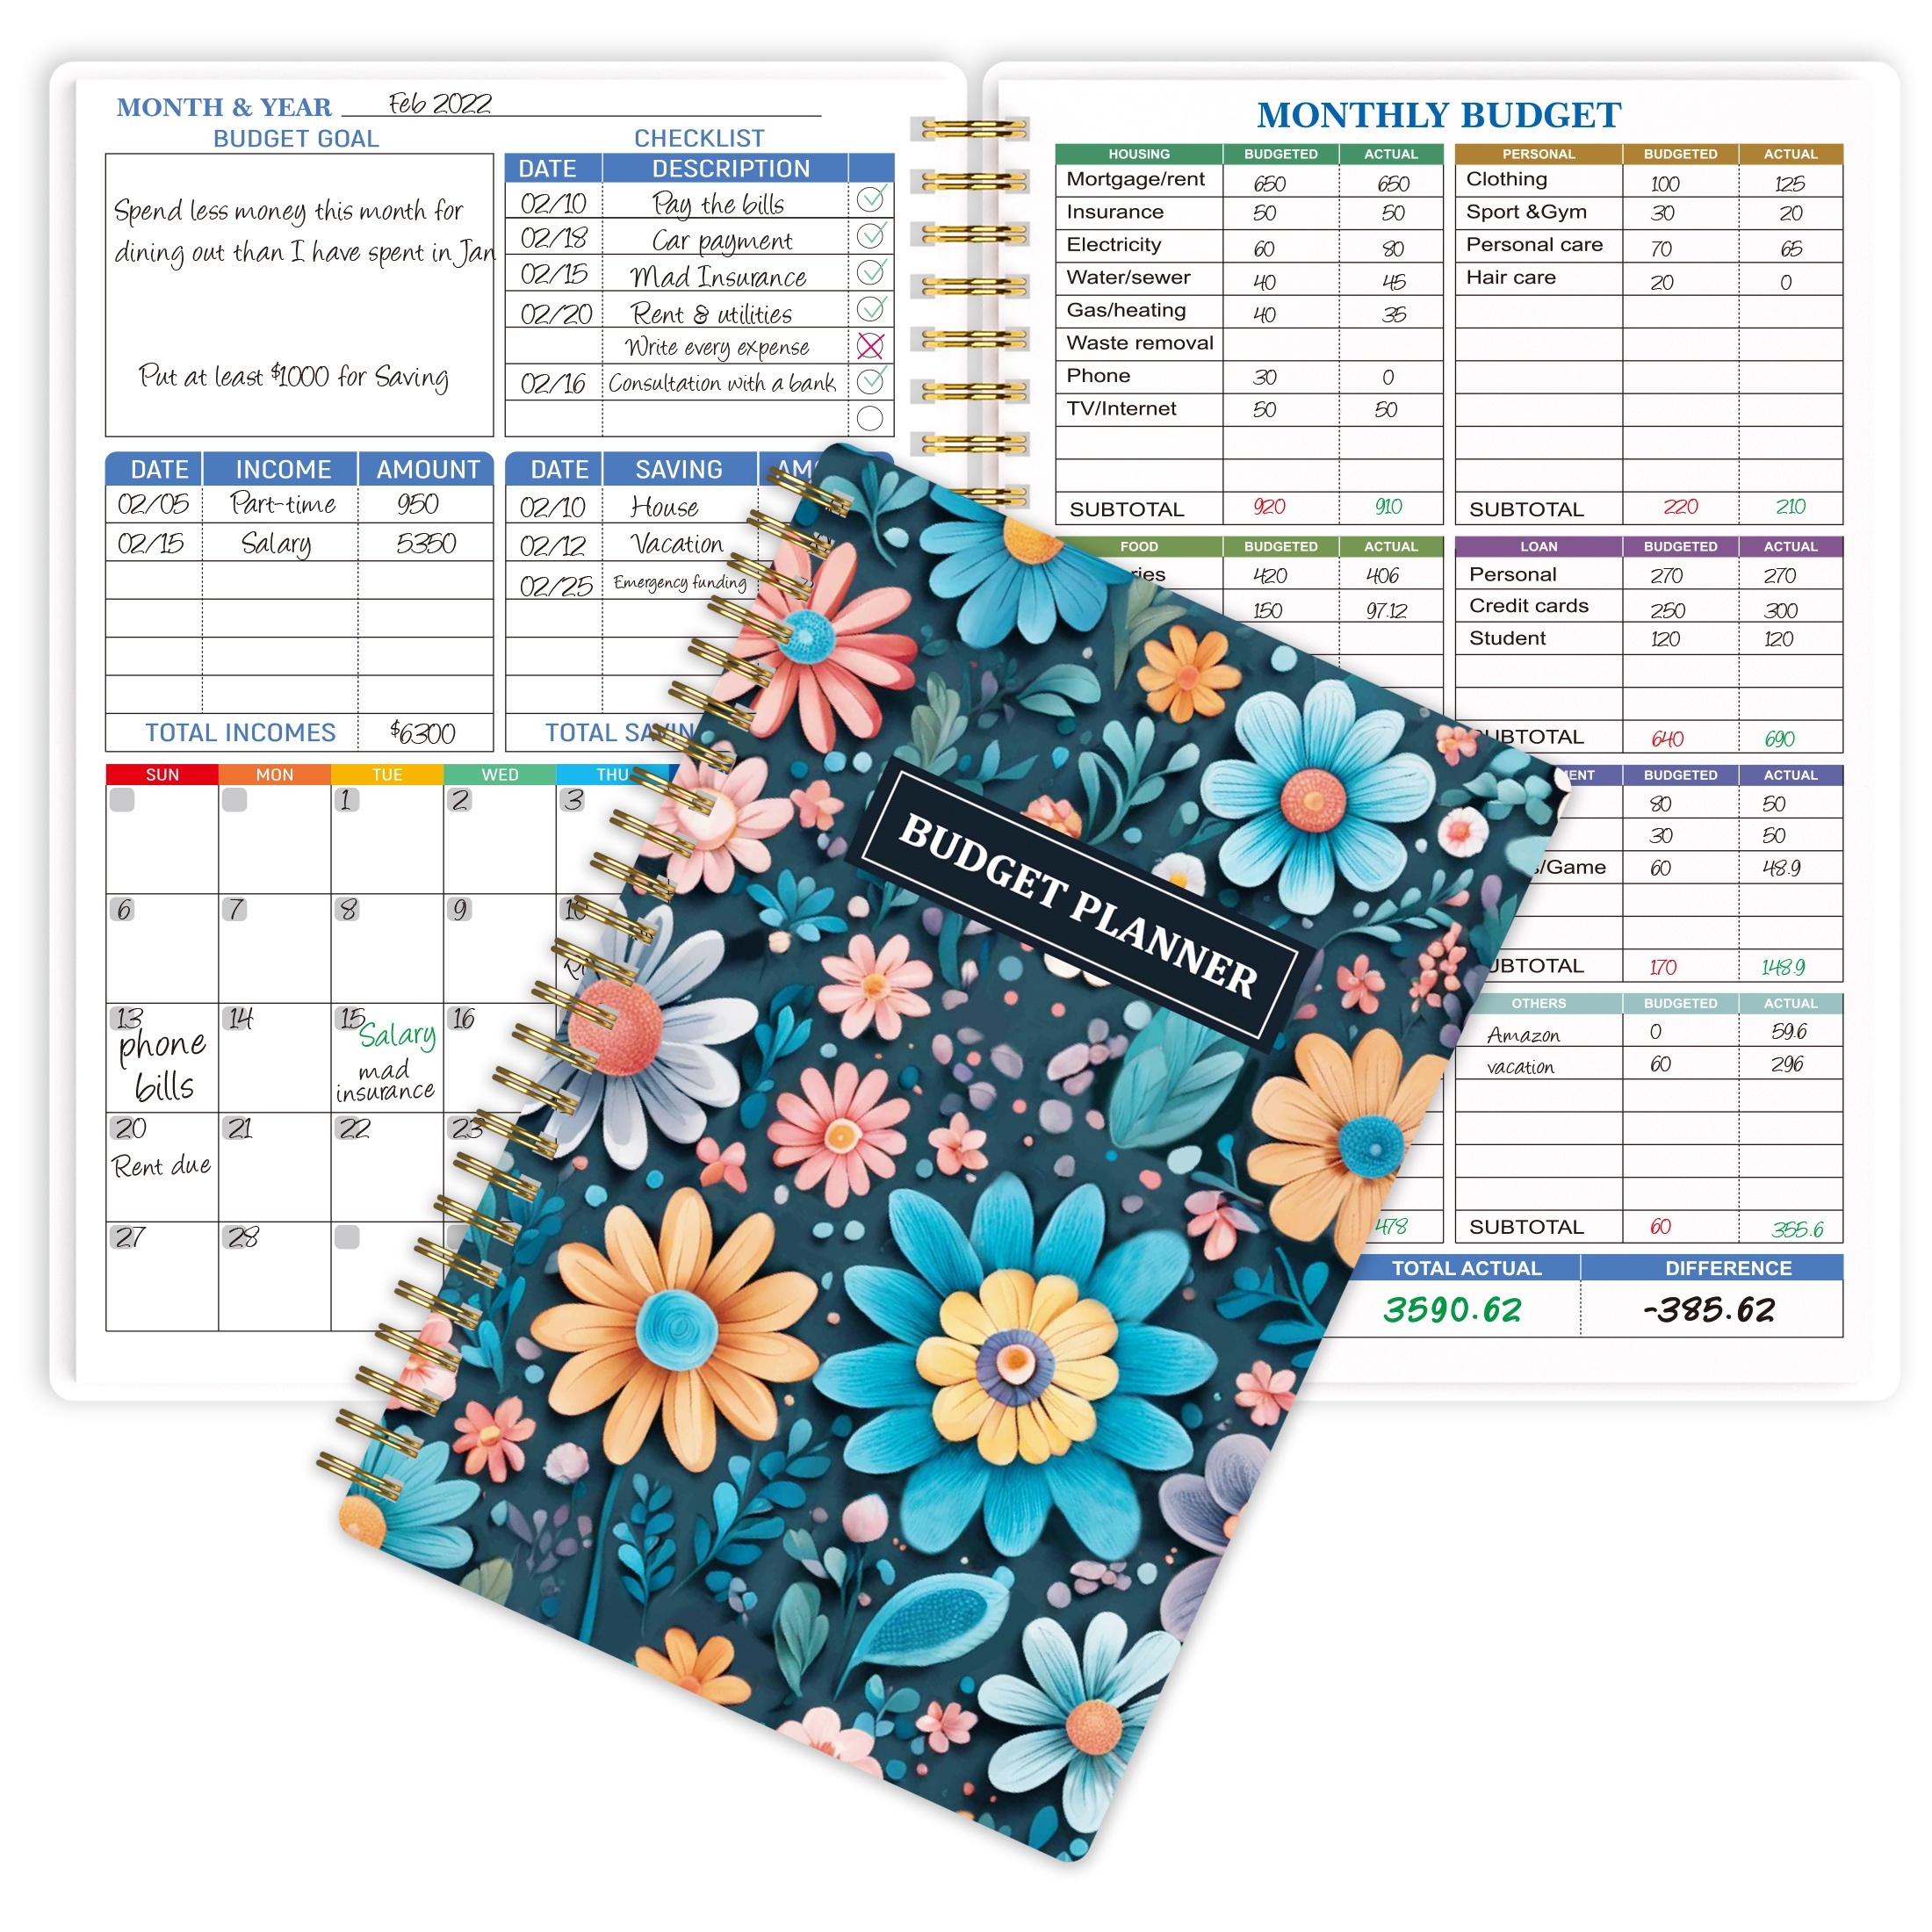 

1pc Budget Planner - Monthly Finance Organizer With Expense Tracker Notebook To Manage Your Money Effectively, Undated Finance Planner/account Book, A5 (8.6x5.9 In), 100gsm Paper - Dark Flower